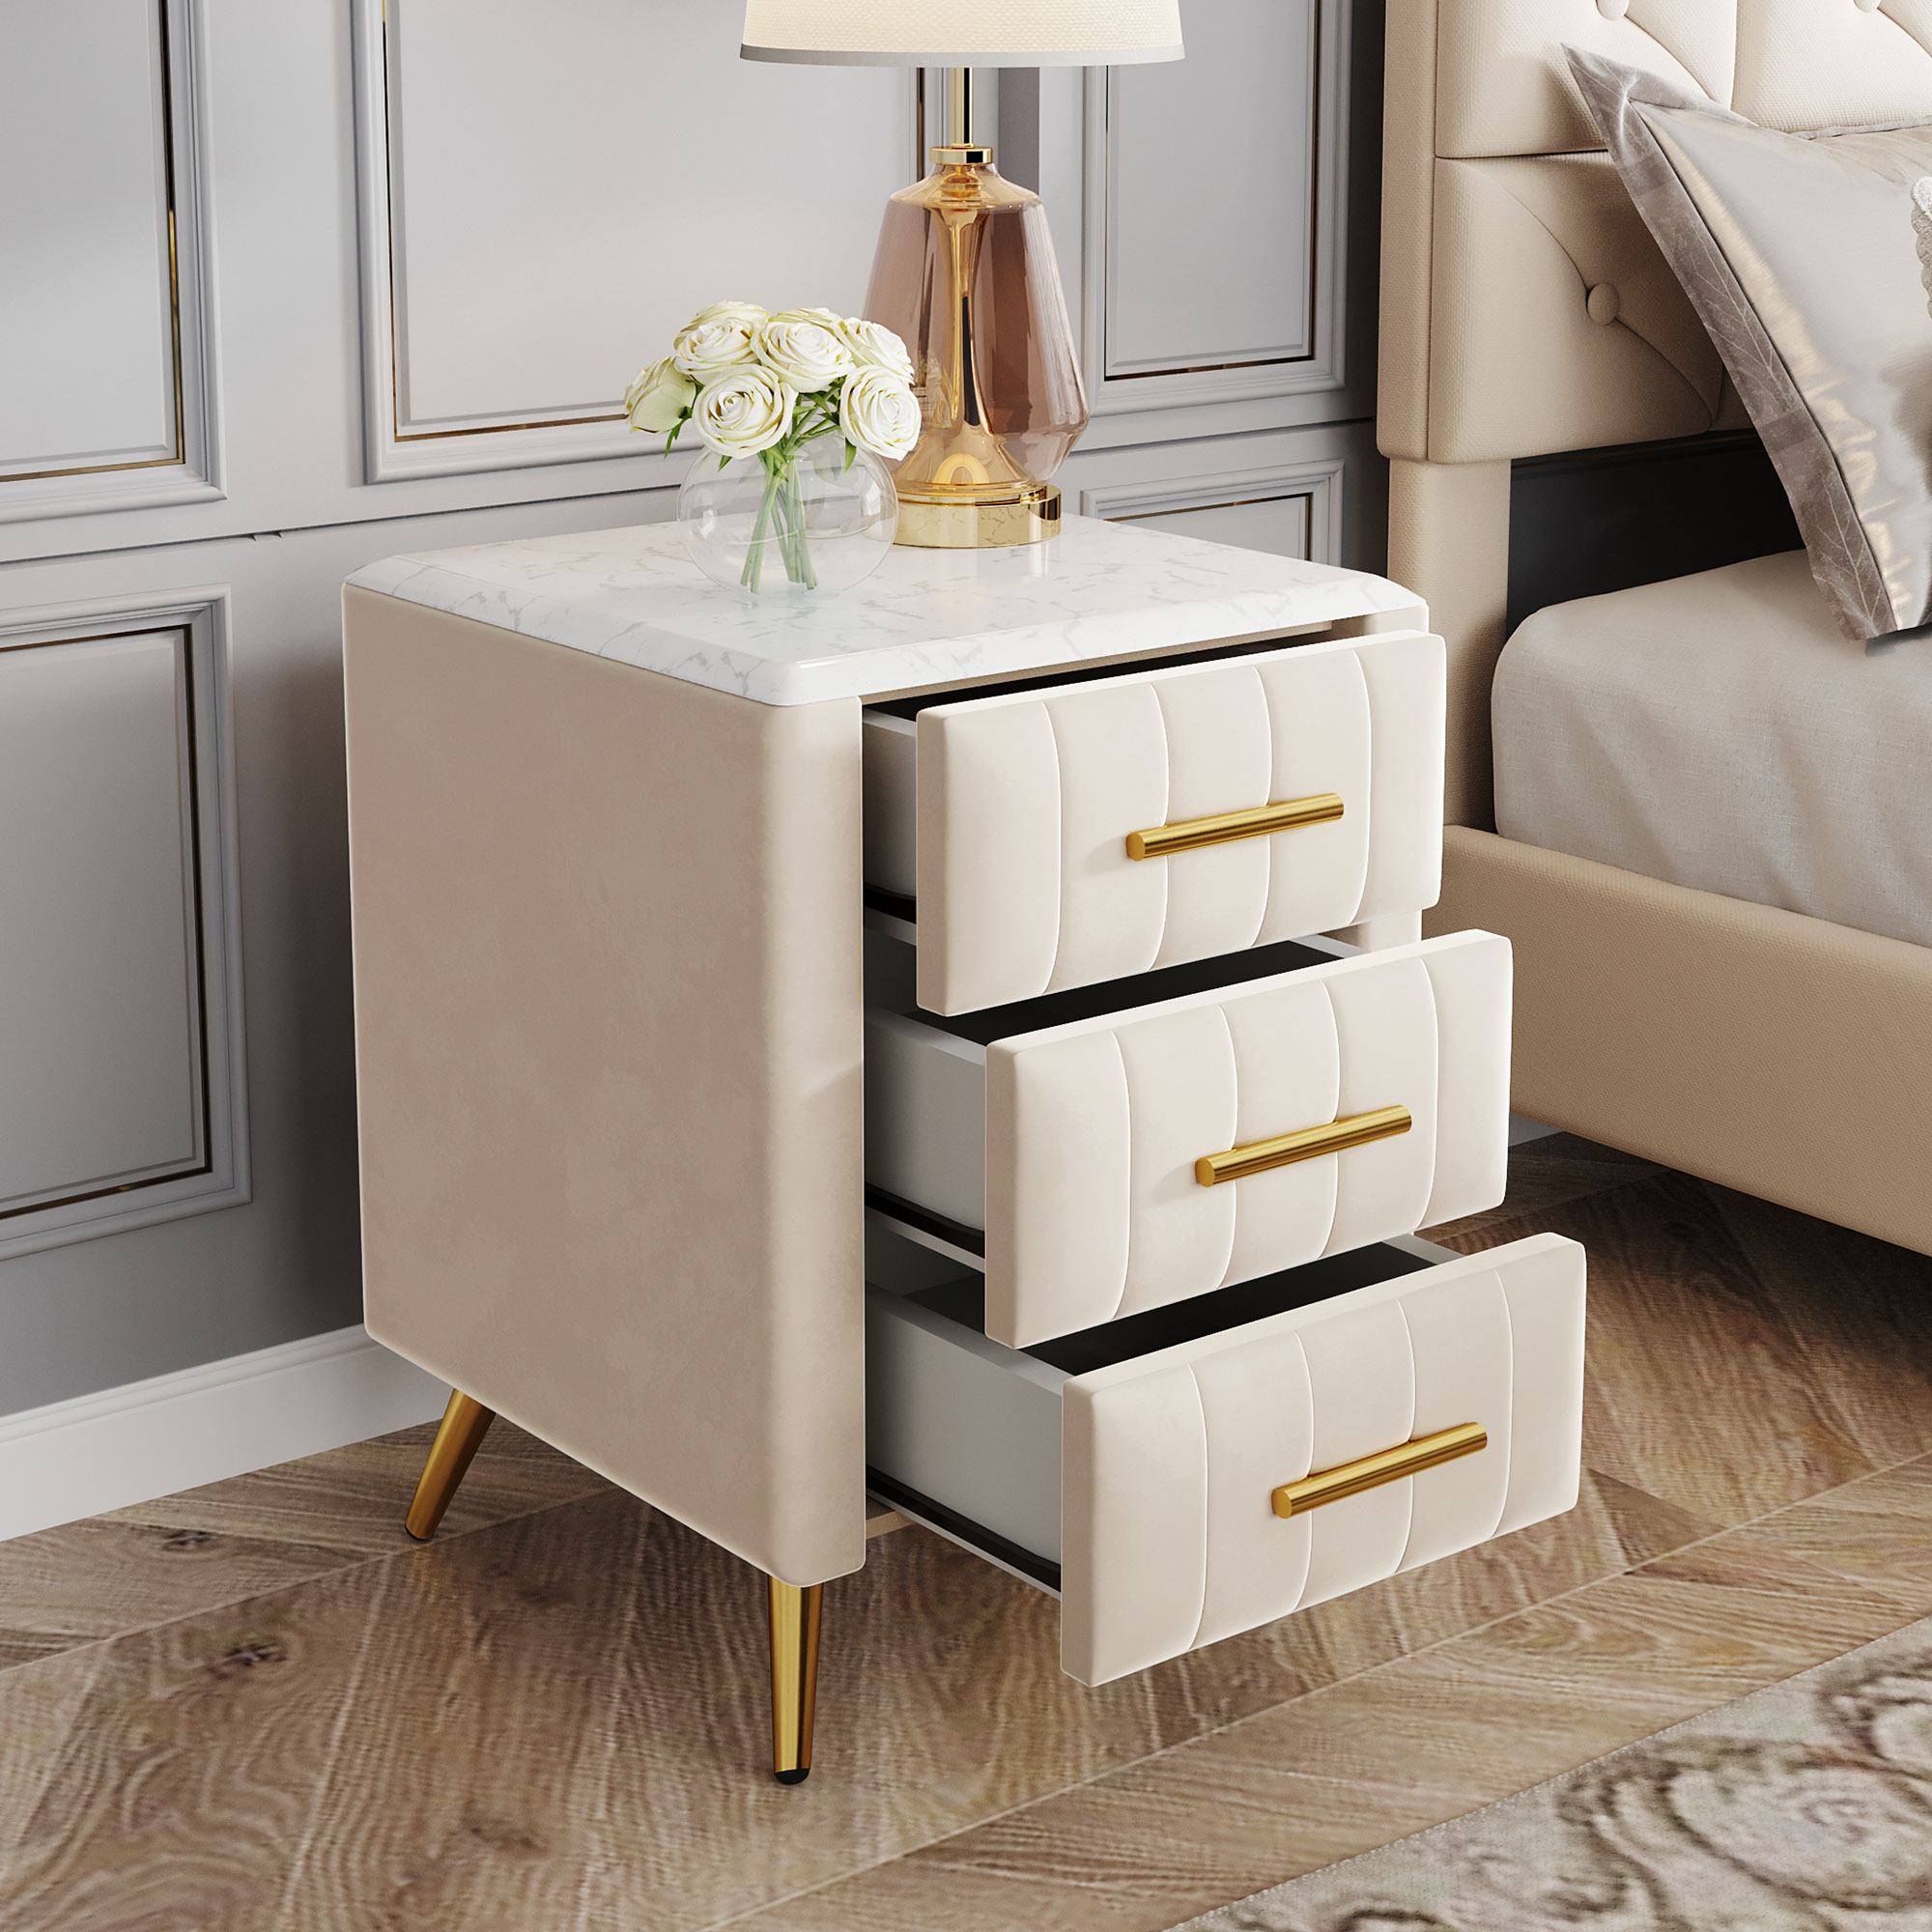 Upholstered Wooden Nightstand with 3 Drawers and Metal Legs & Handles - WF295493AAA